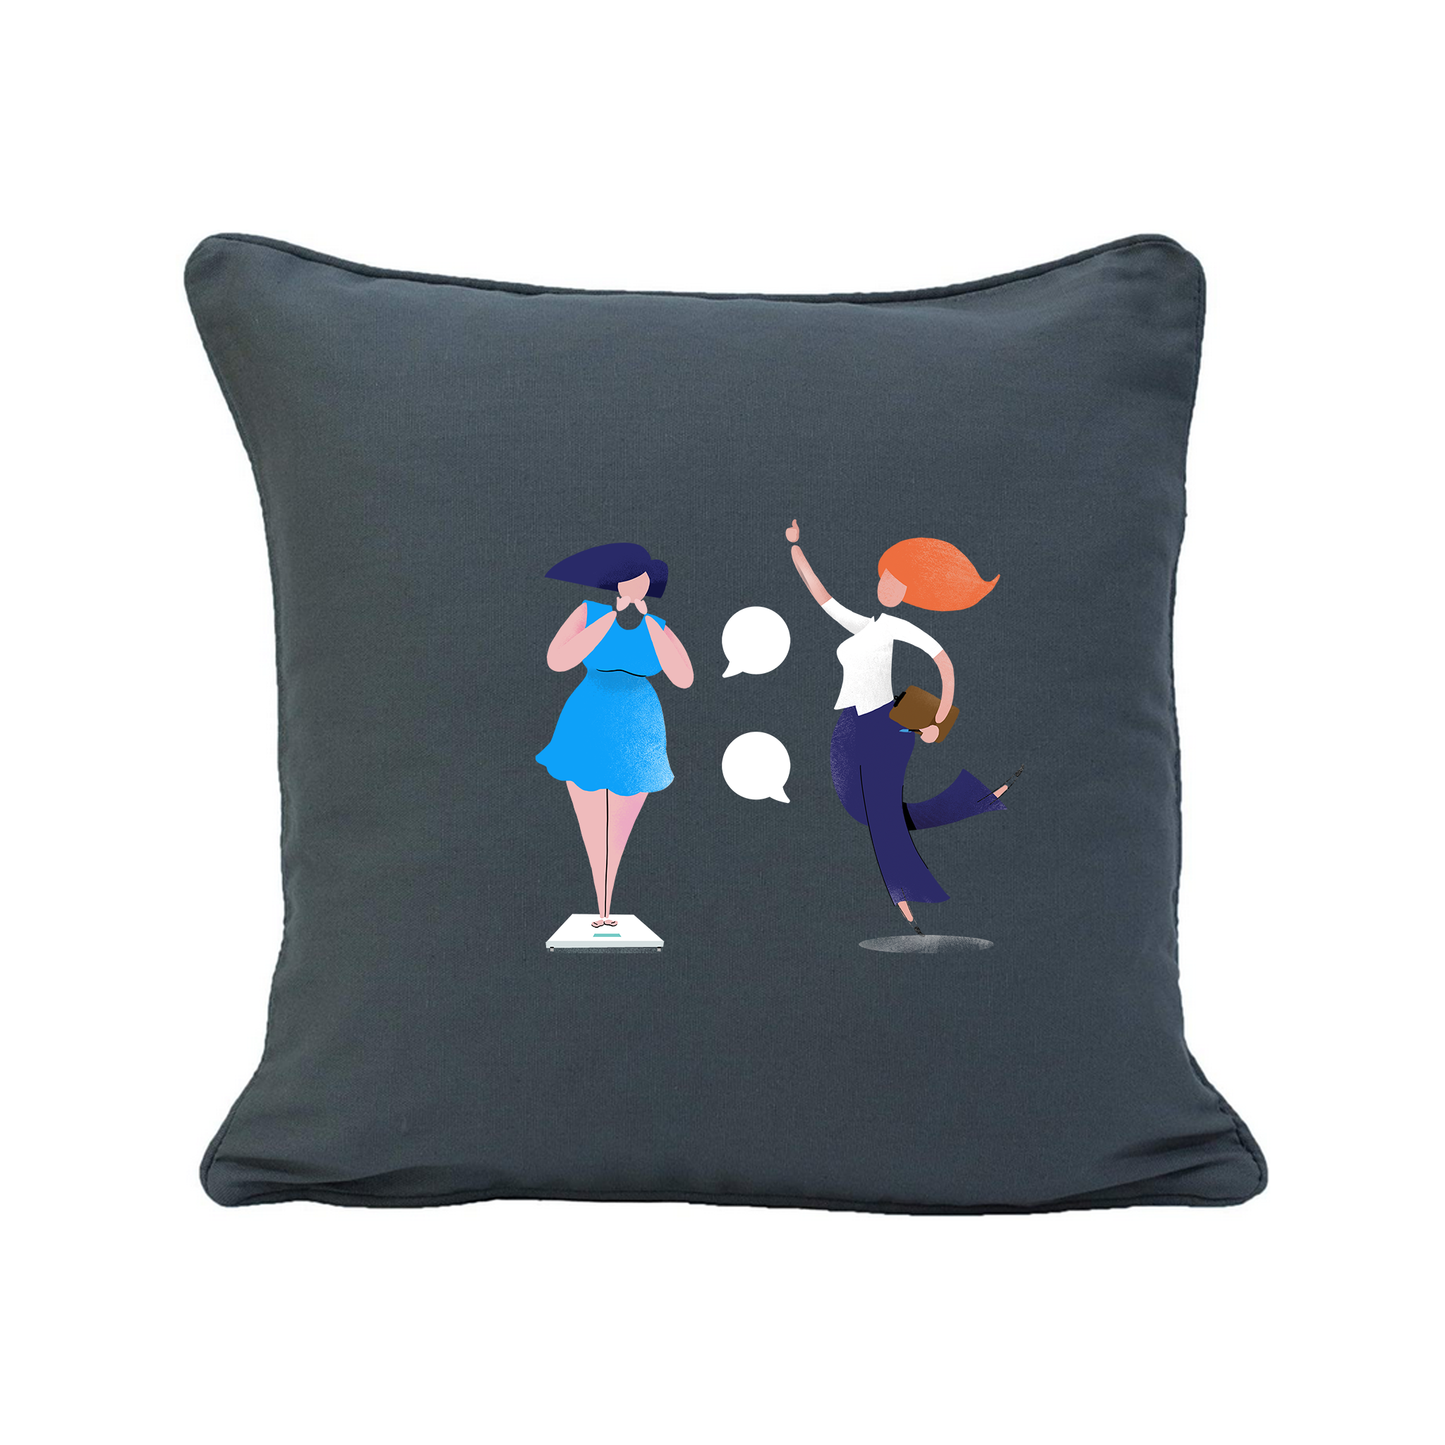 The 1:1 Diet - Cushion Cover